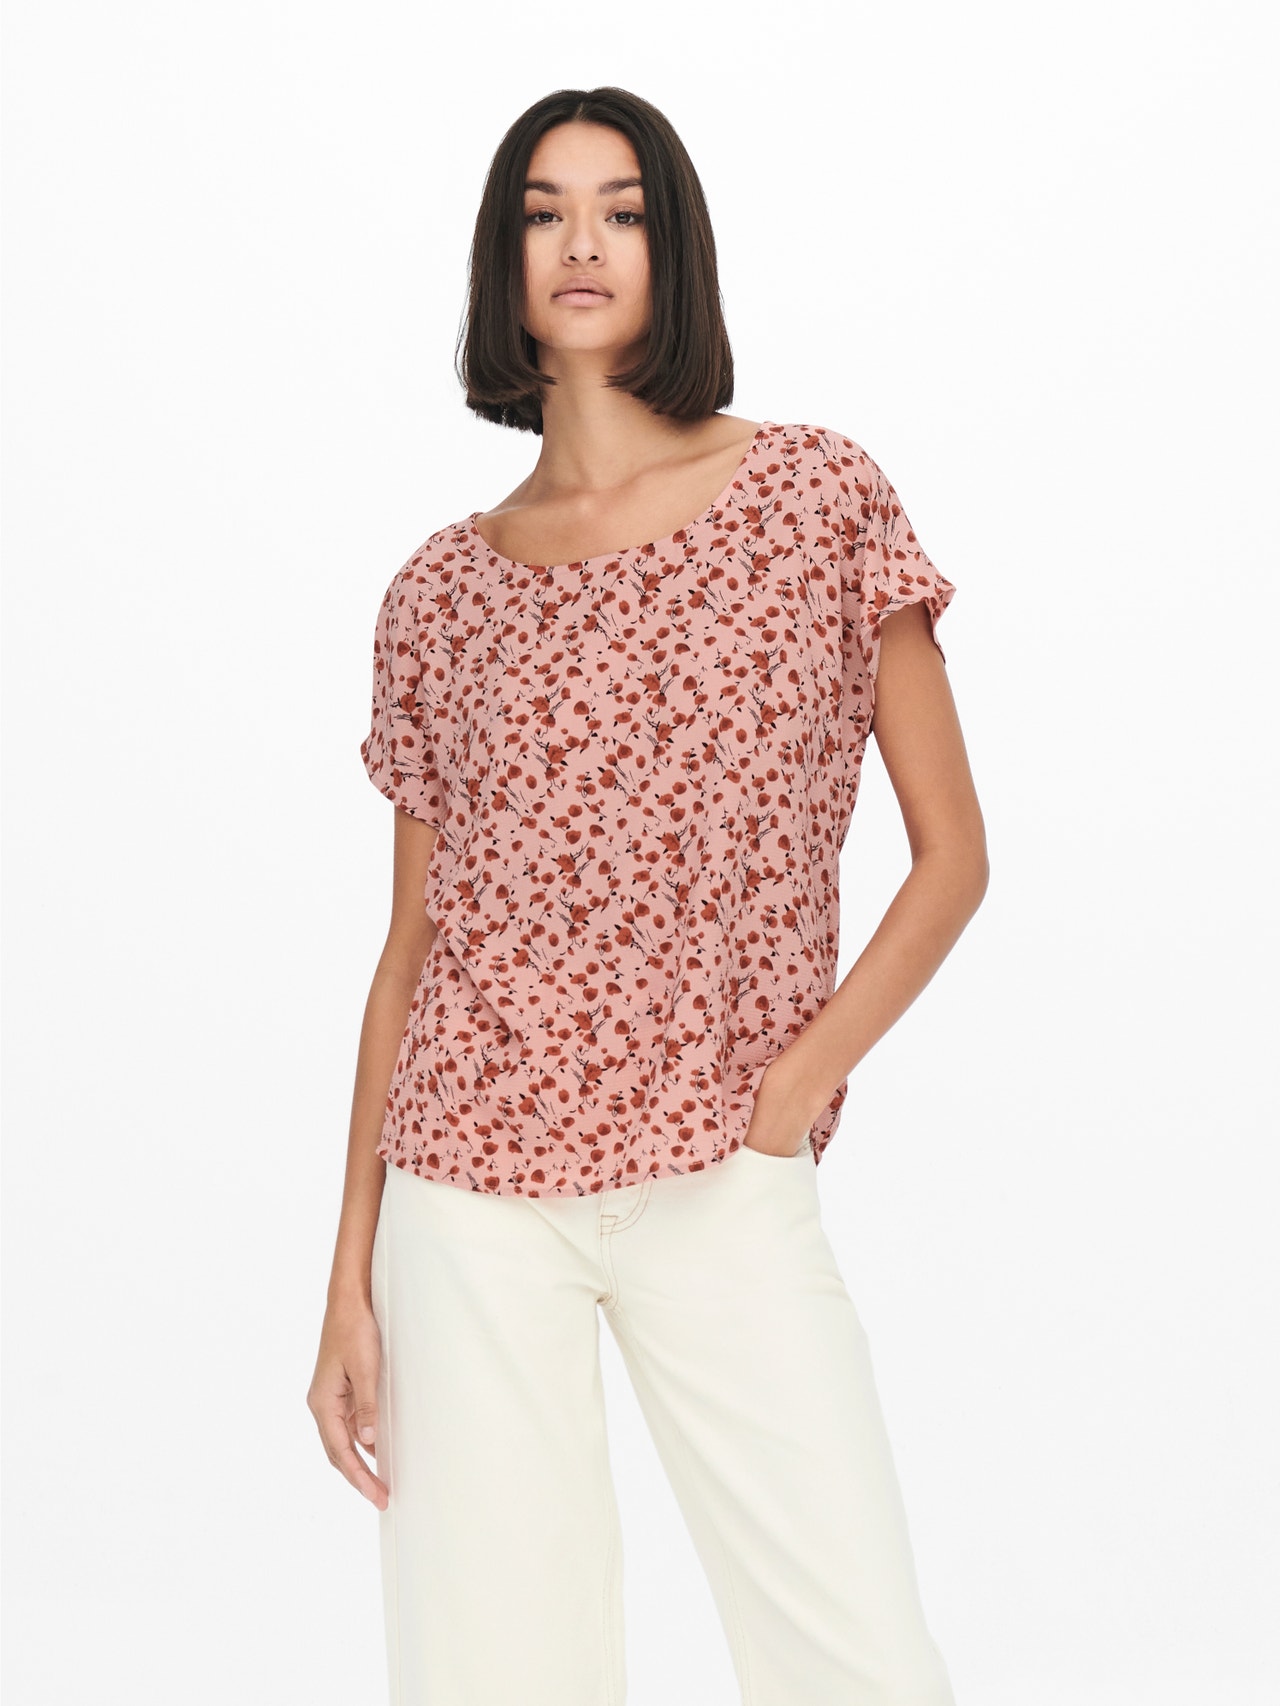 ONLY Print Top -Old Rose - 15234106